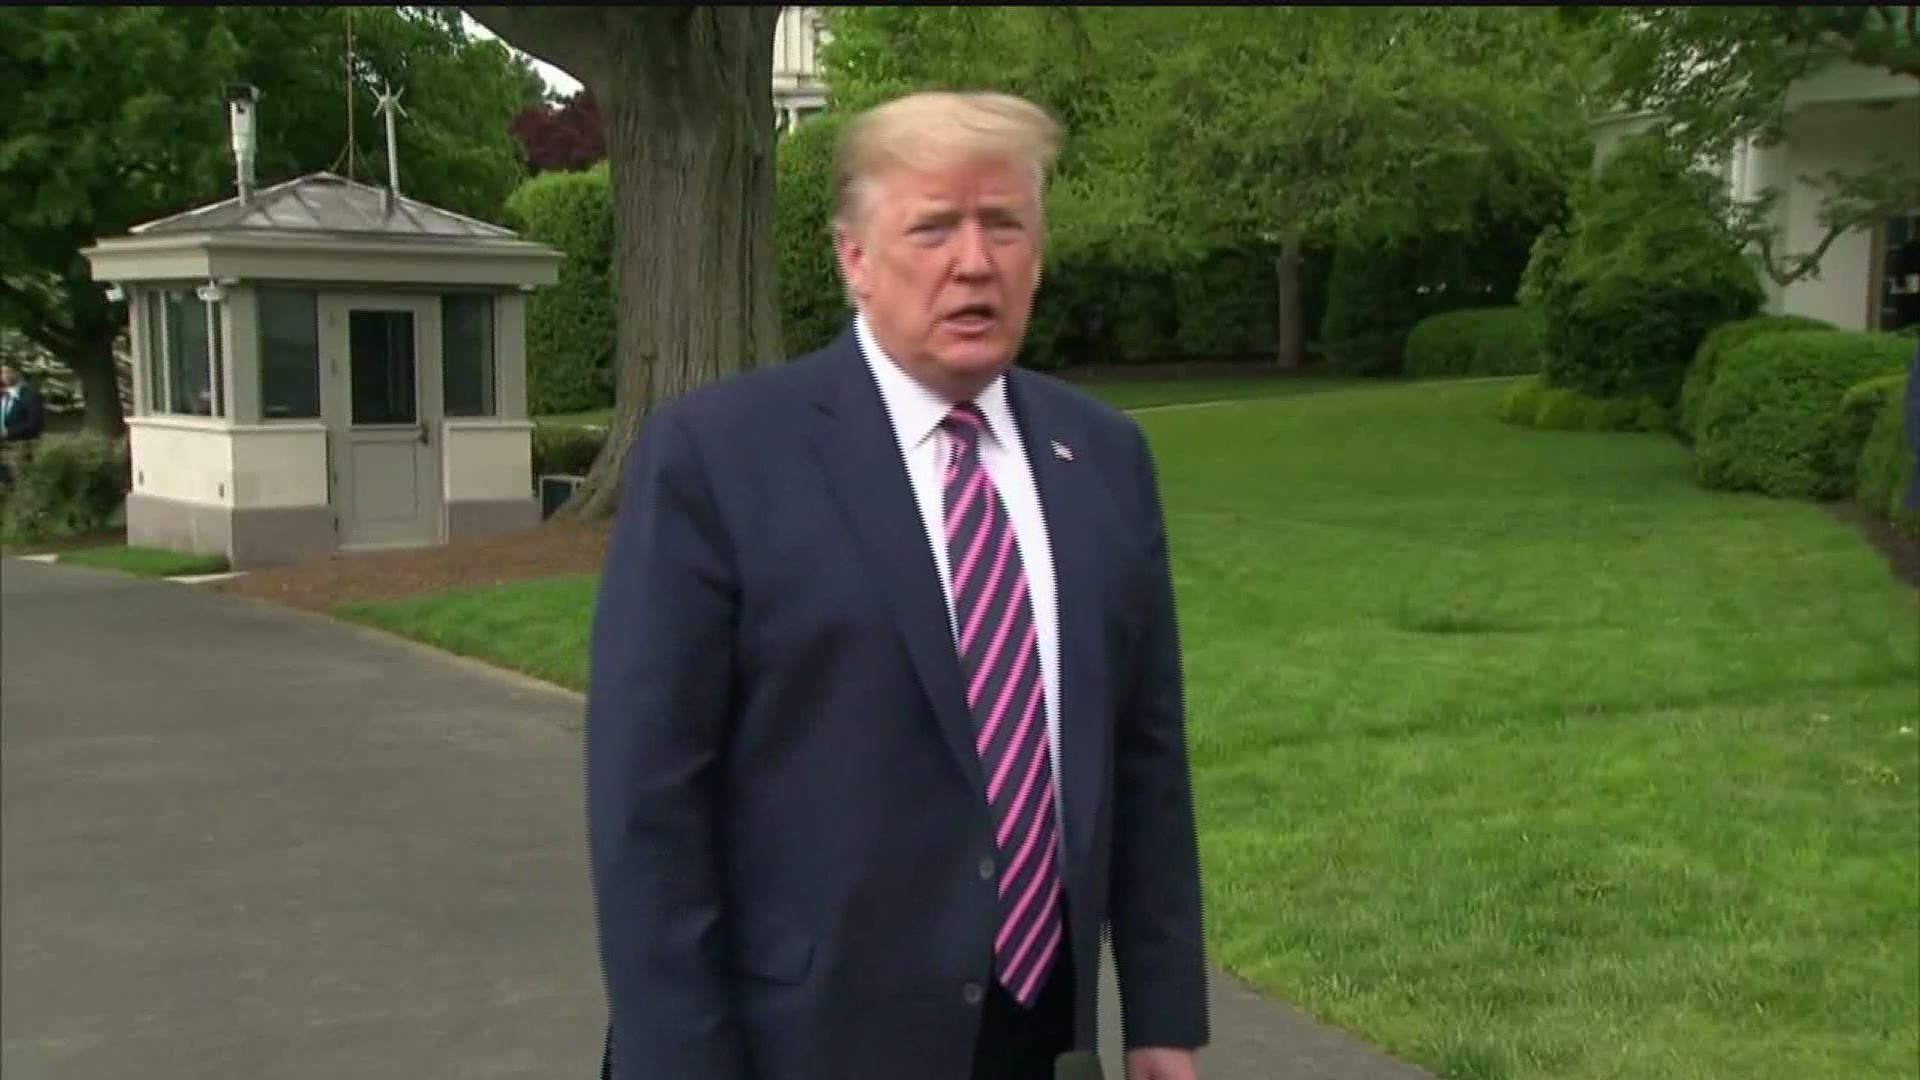 PRESIDENT TRUMP SAYS THAT THE UNITED STATES WAS NOT INVOLVED WITH AN ALLEGED ATTACK IN VENEZUELA THAT LANDED TWO AMERICANS IN JAIL.